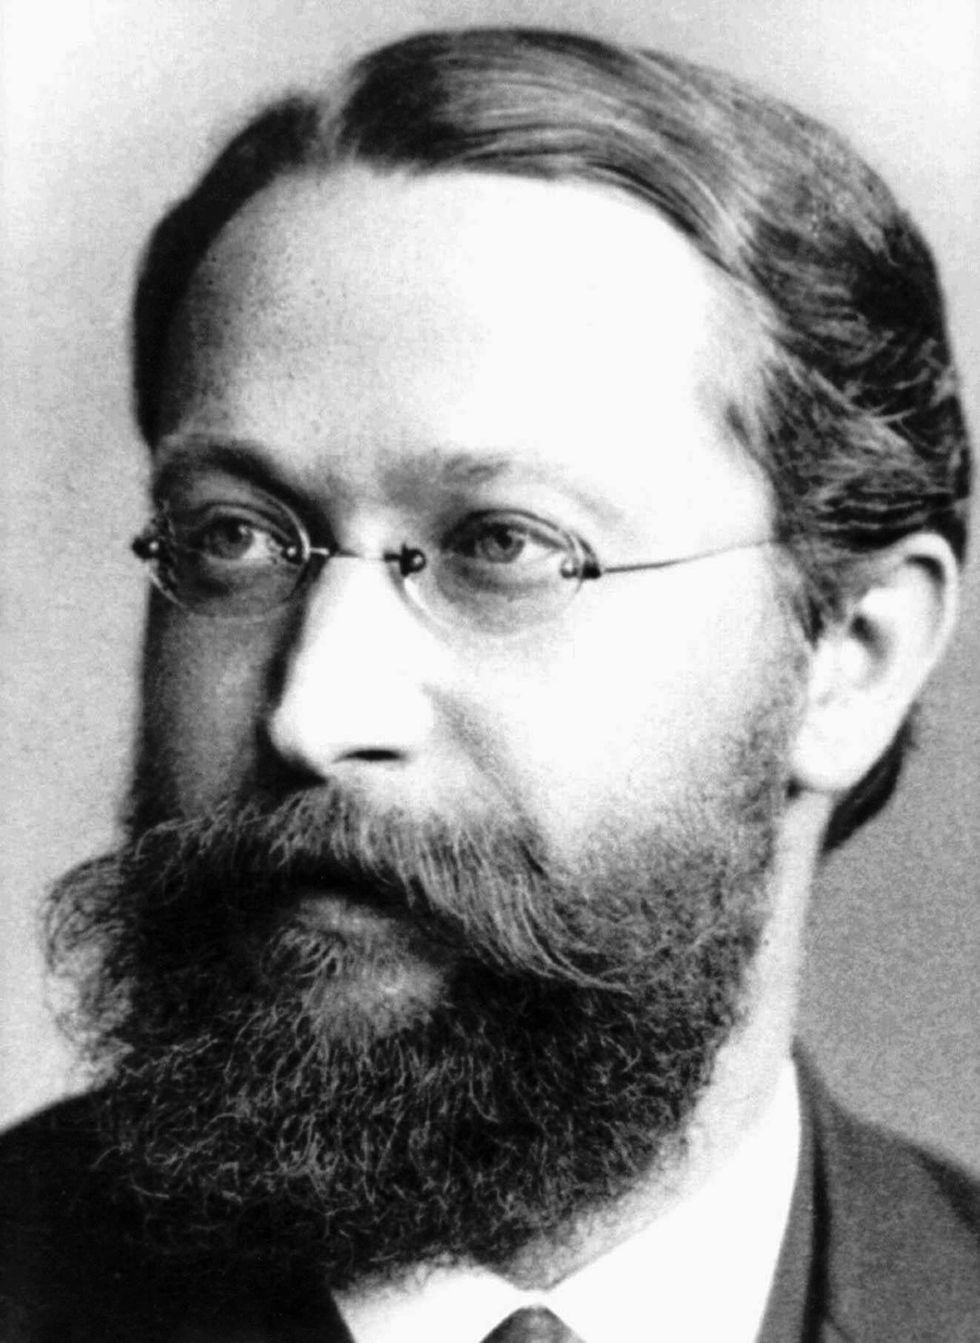 In a black-and-white image of the German physicist Karl Ferdinand Braun, he has a full beard and small wire-rimmed glasses.